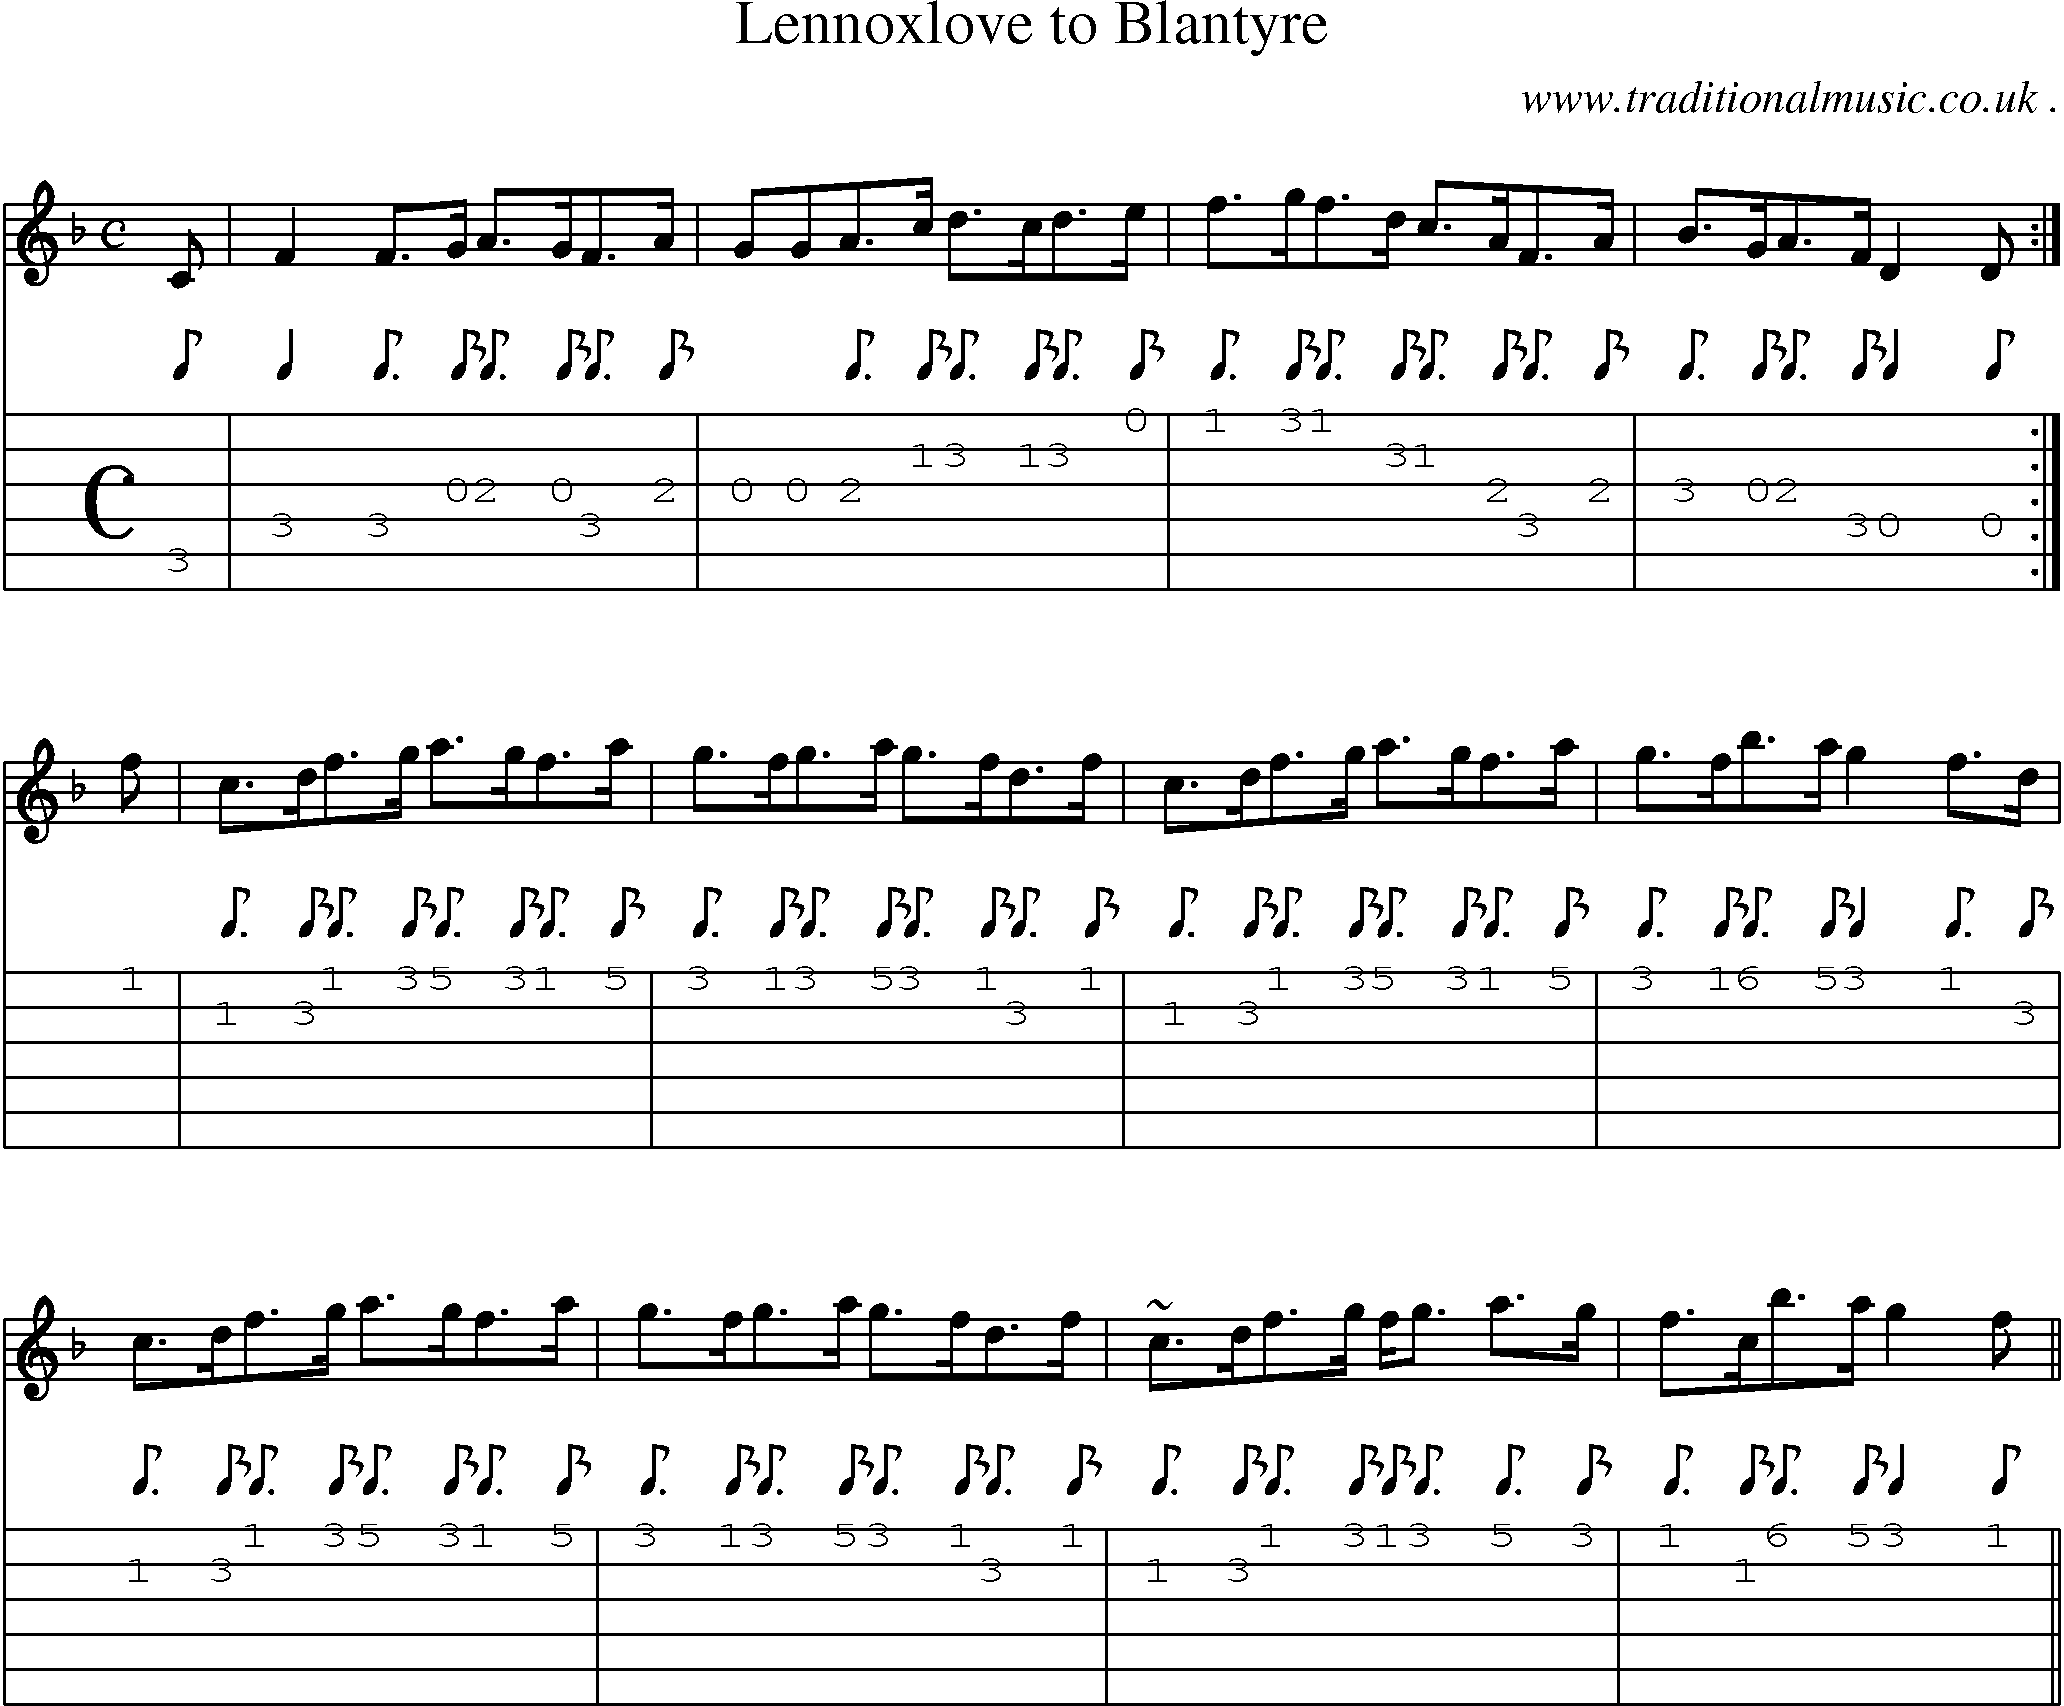 Sheet-music  score, Chords and Guitar Tabs for Lennoxlove To Blantyre